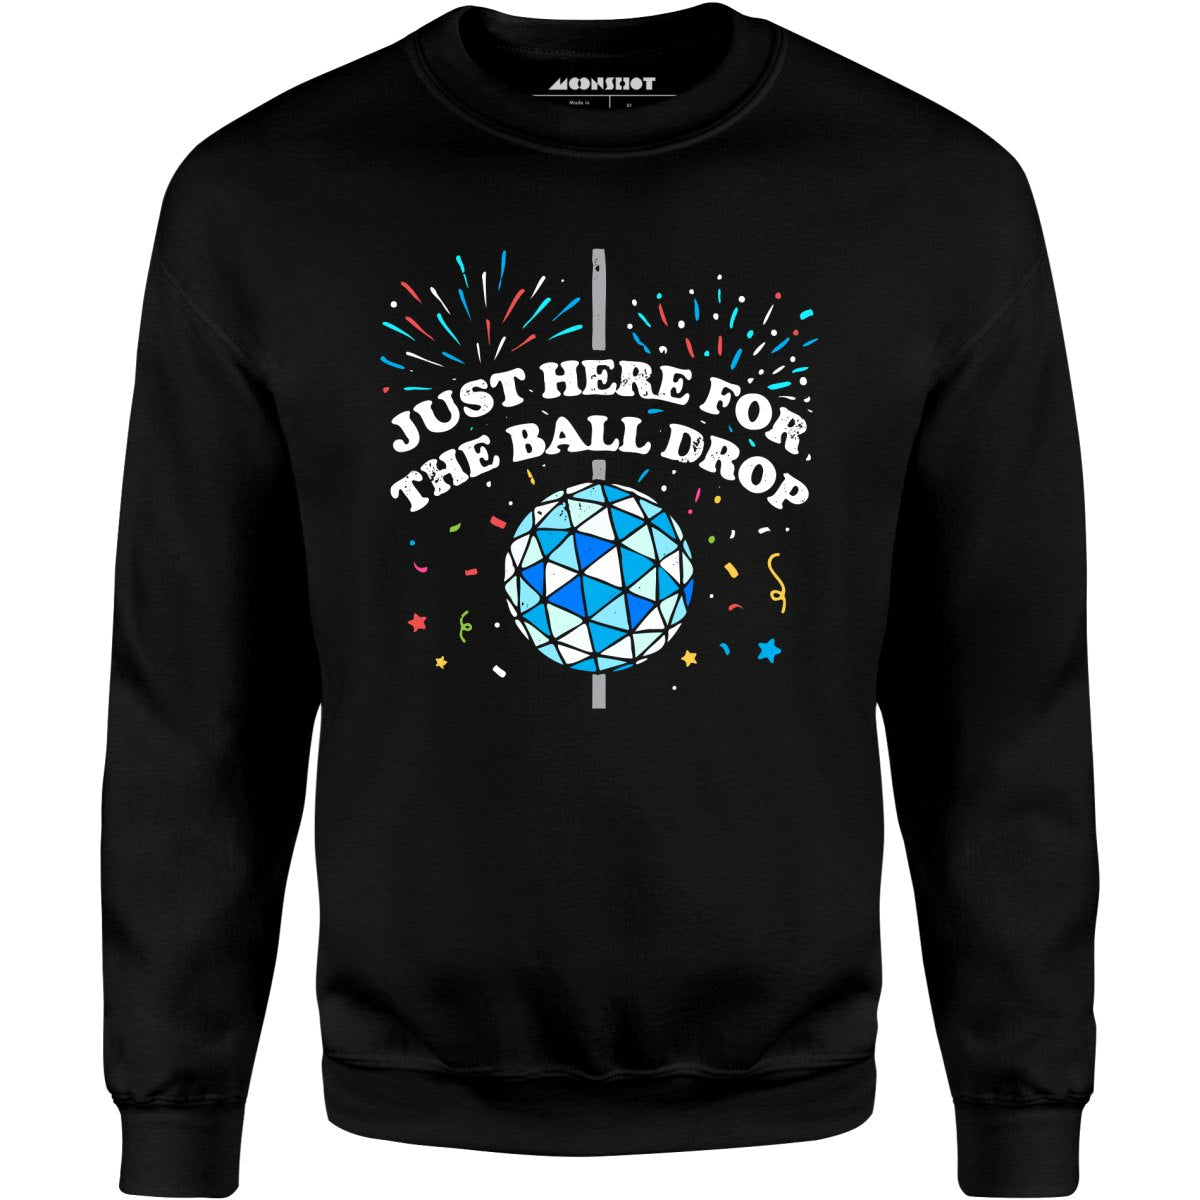 Just Here for The Ball Drop - Unisex Sweatshirt